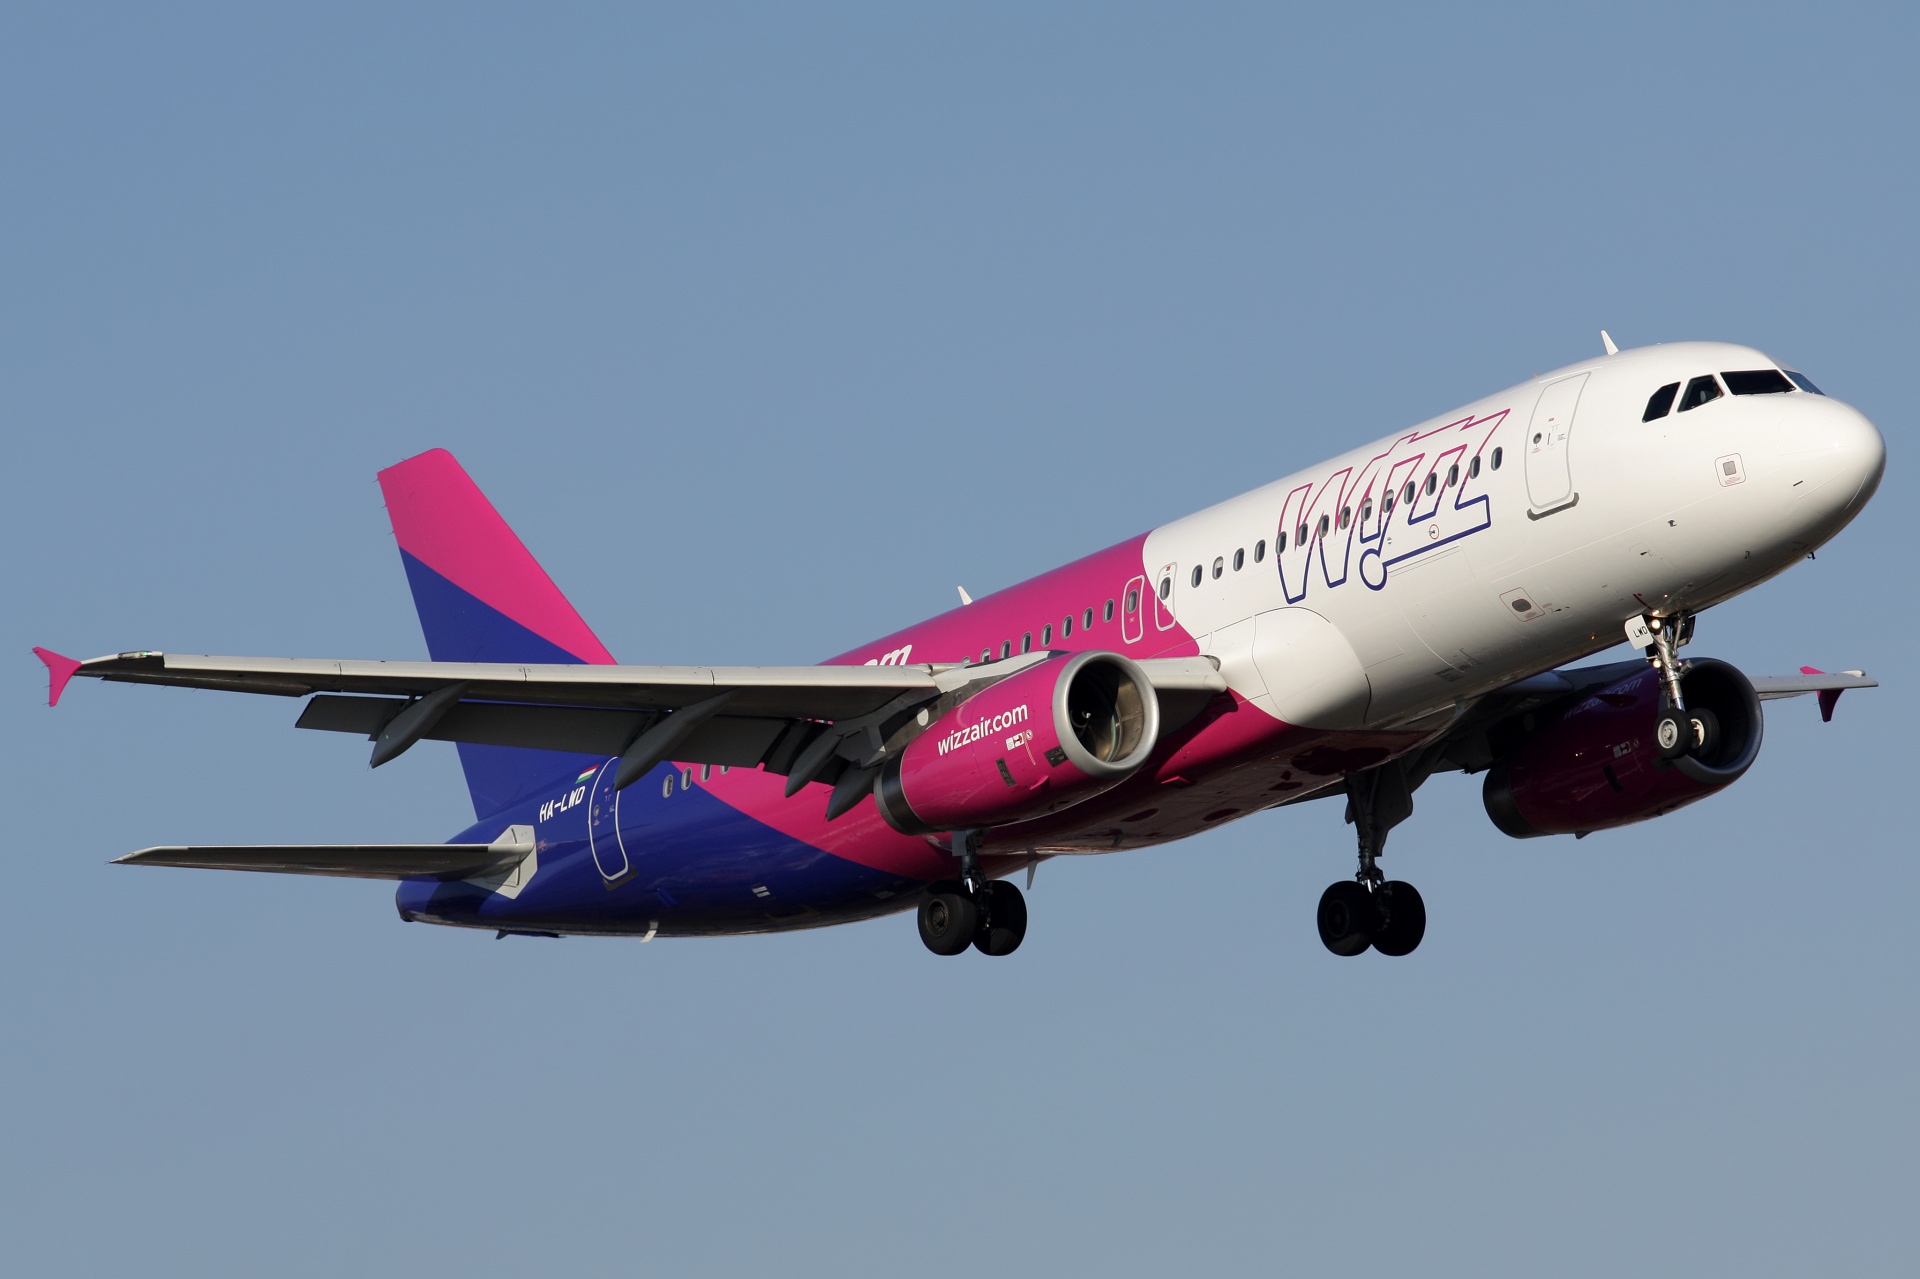 HA-LWD (new livery) (Aircraft » EPWA Spotting » Airbus A320-200 » Wizz Air)